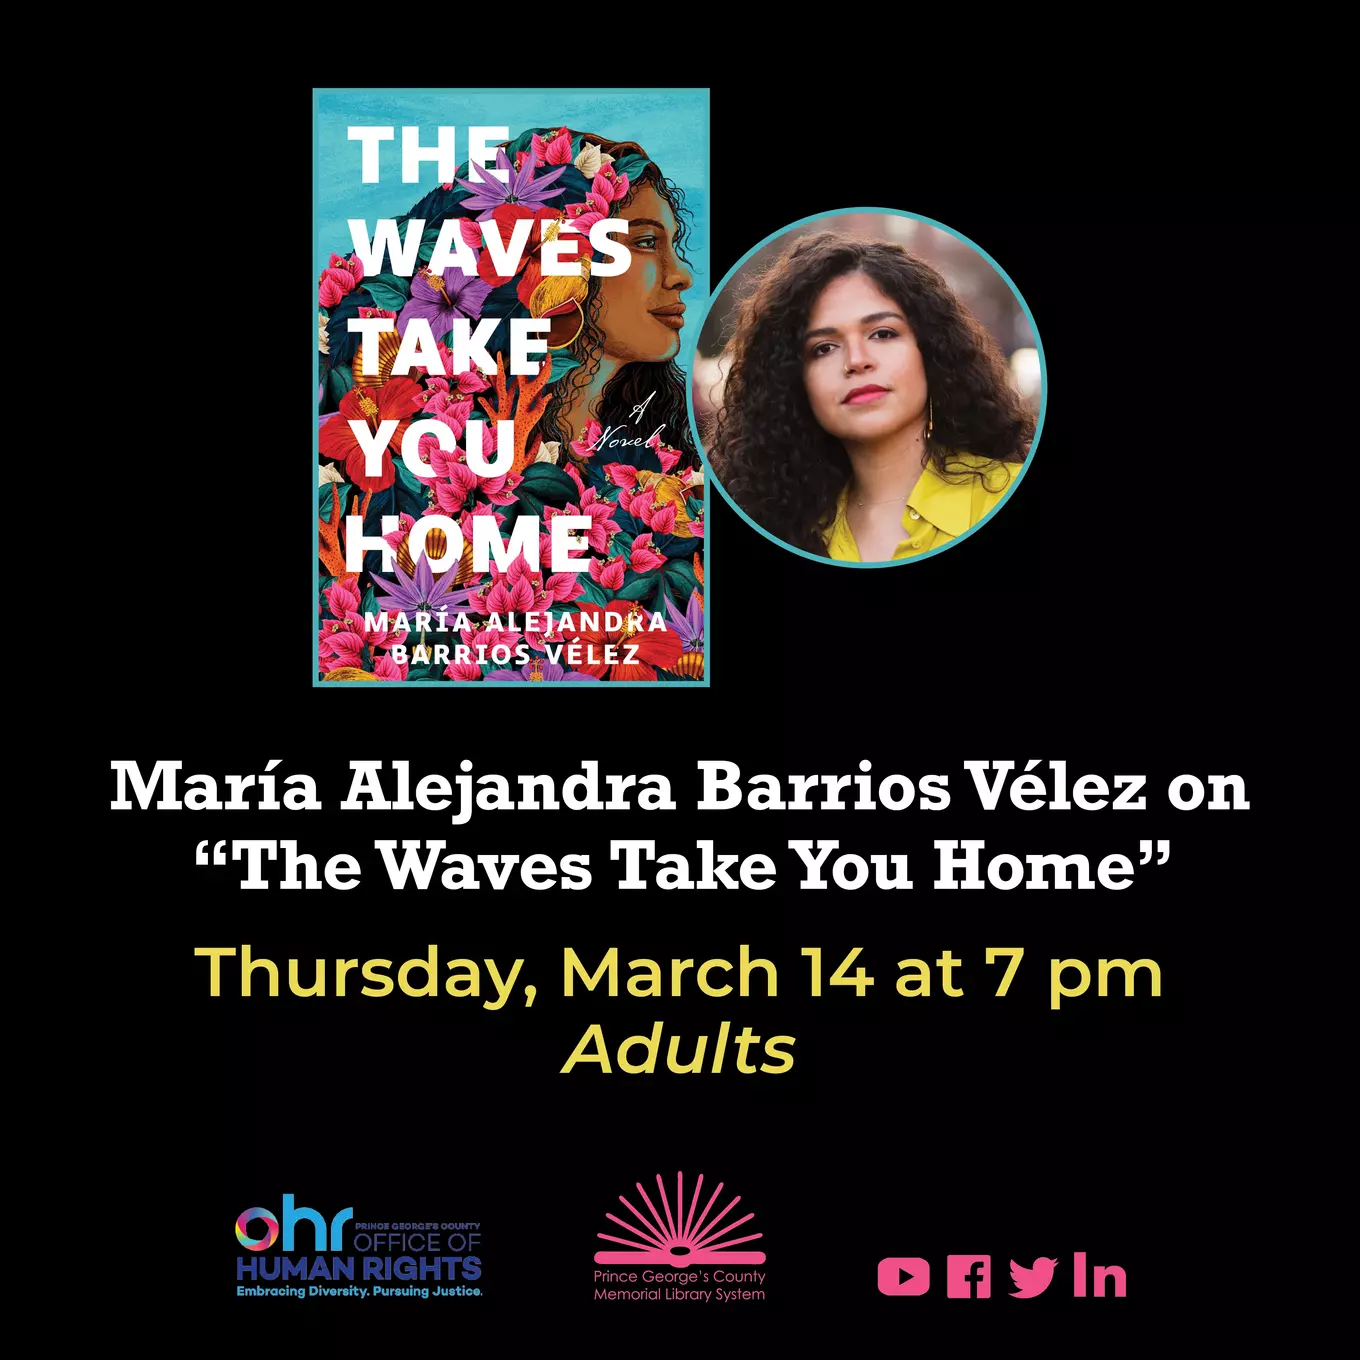 Flyer for "The Waves Take You Home" - Thursday, March 14 at 7 pm featuring image of author and book cover